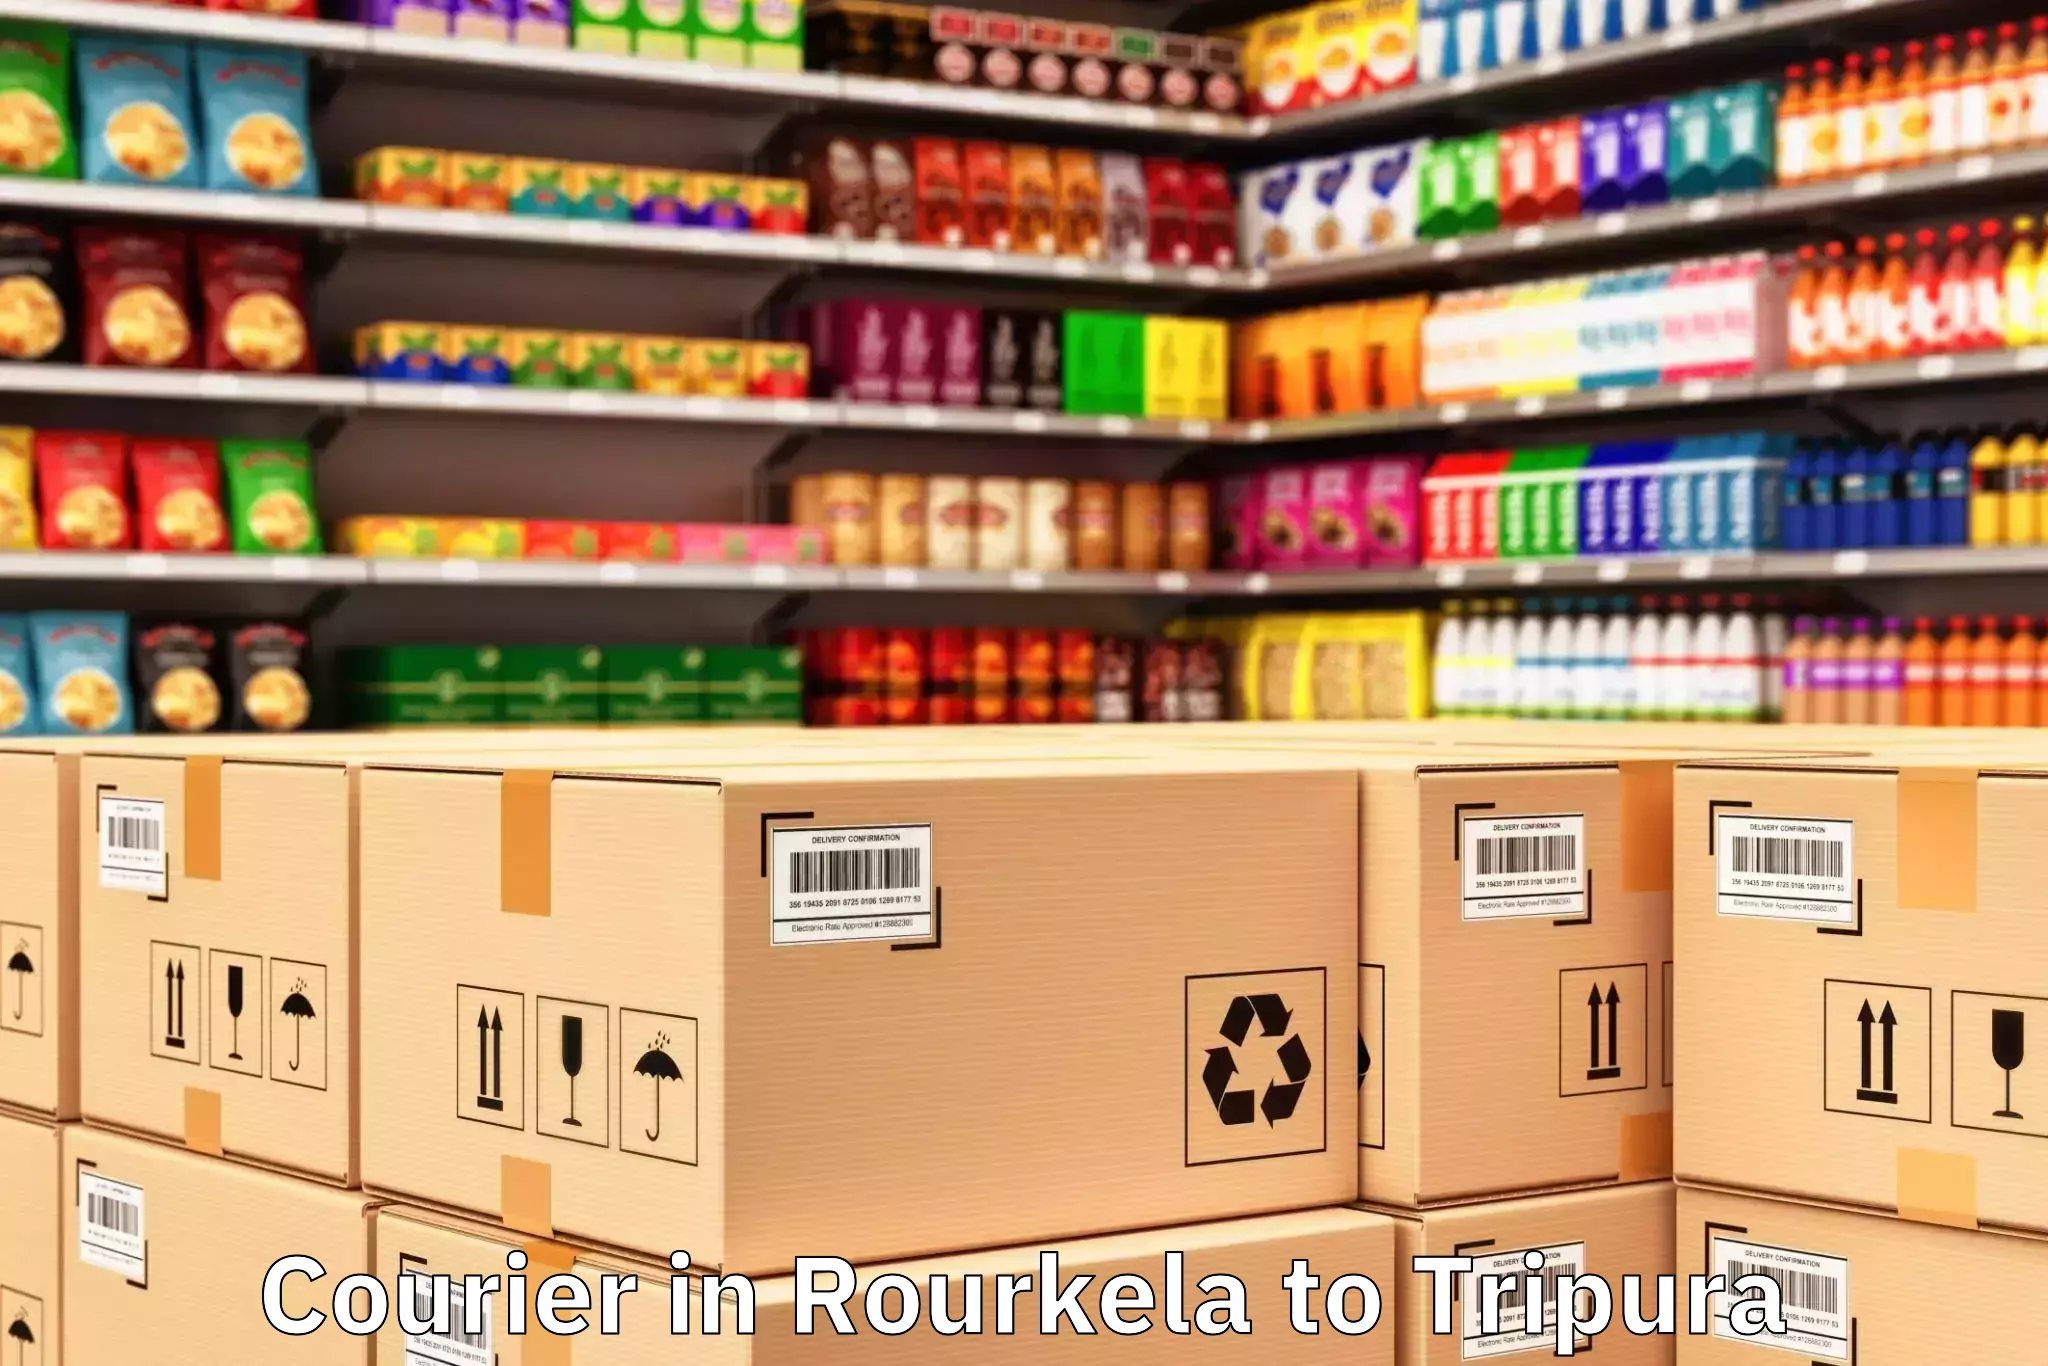 Trusted Rourkela to Tripura Courier